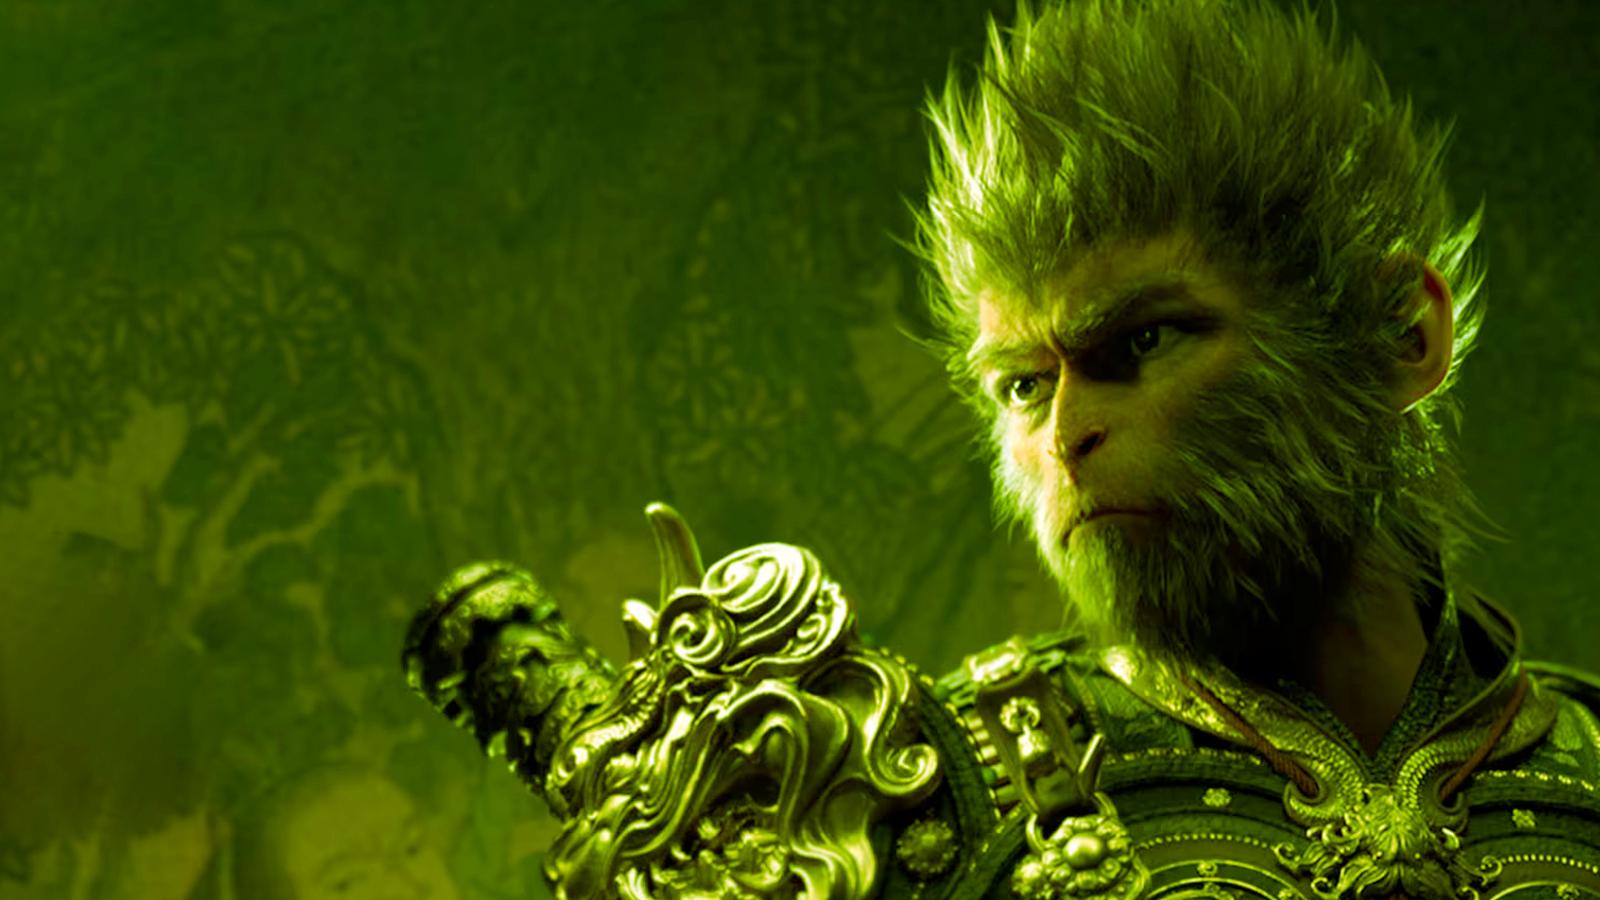 black myth wukong poster colored green to match nvidia